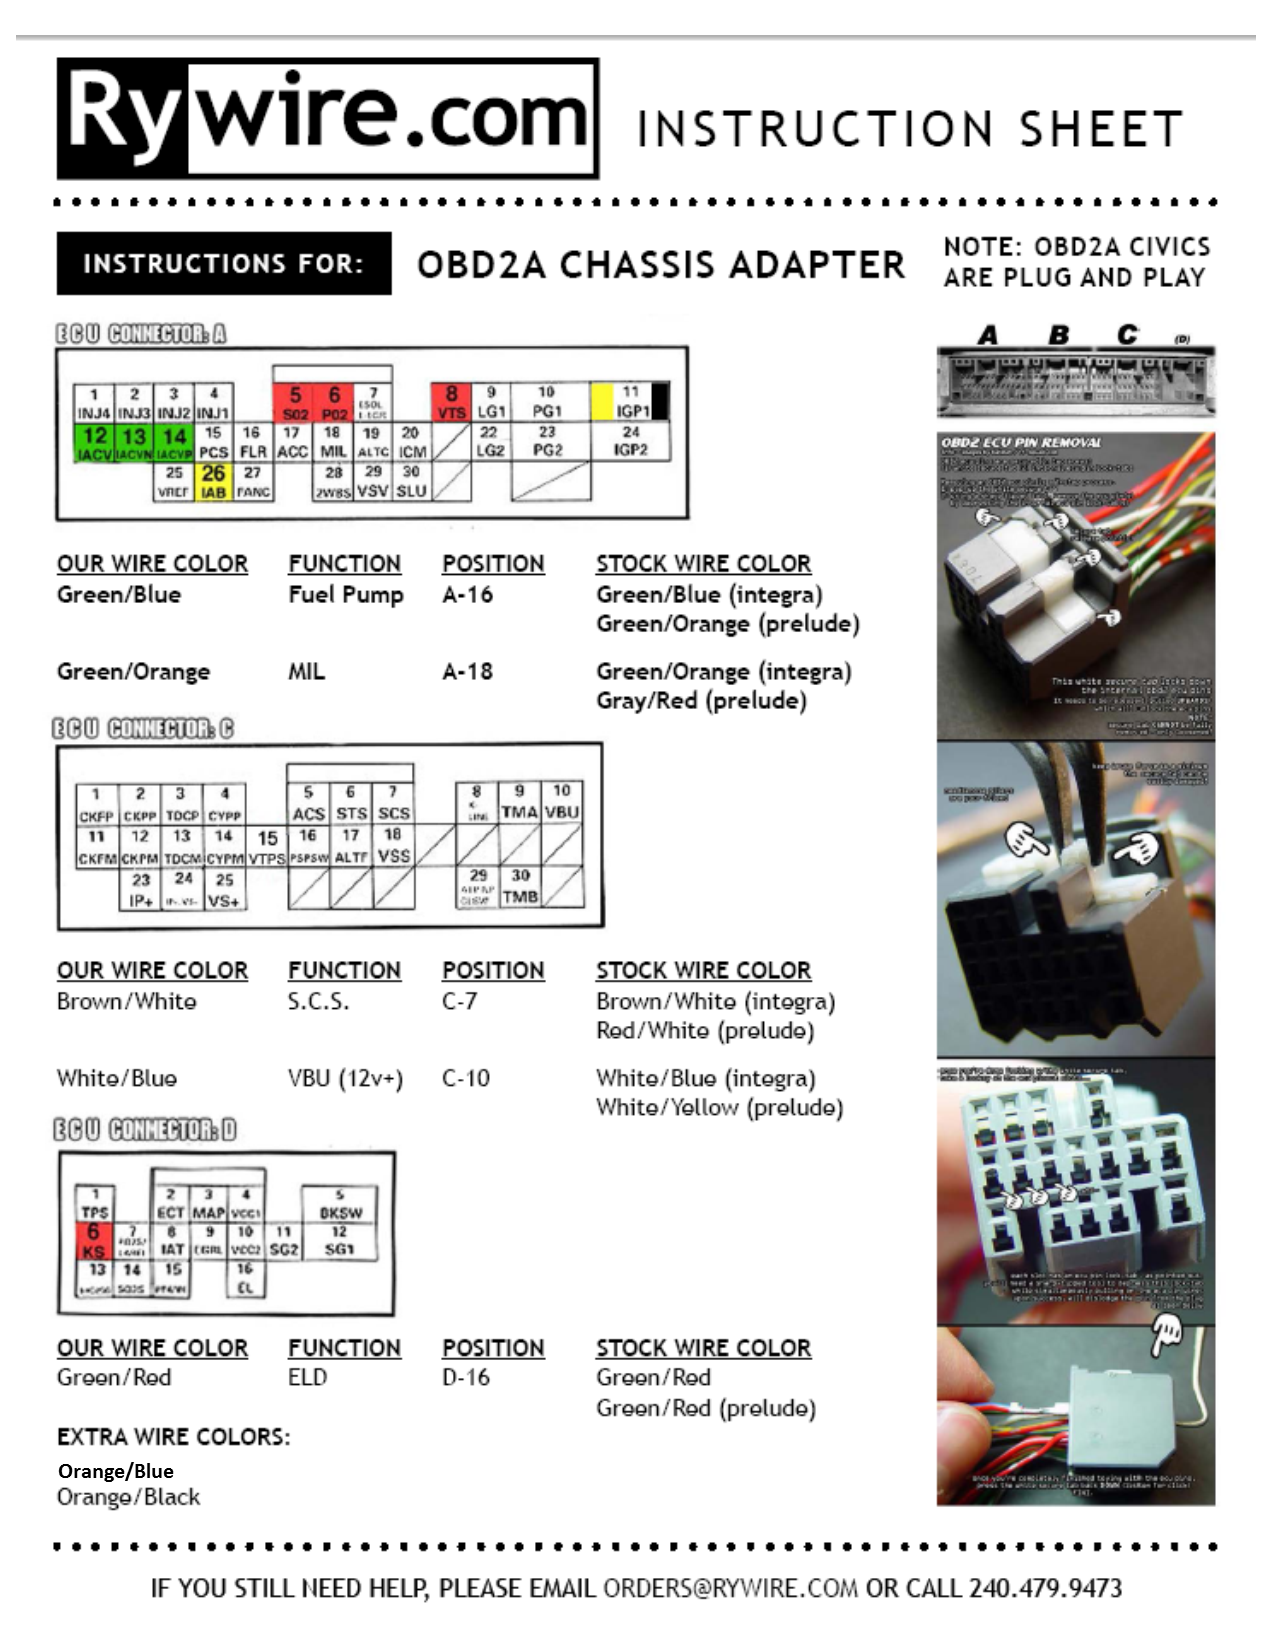 Rywire_Instructions_OBD2a-Chassis-adapter